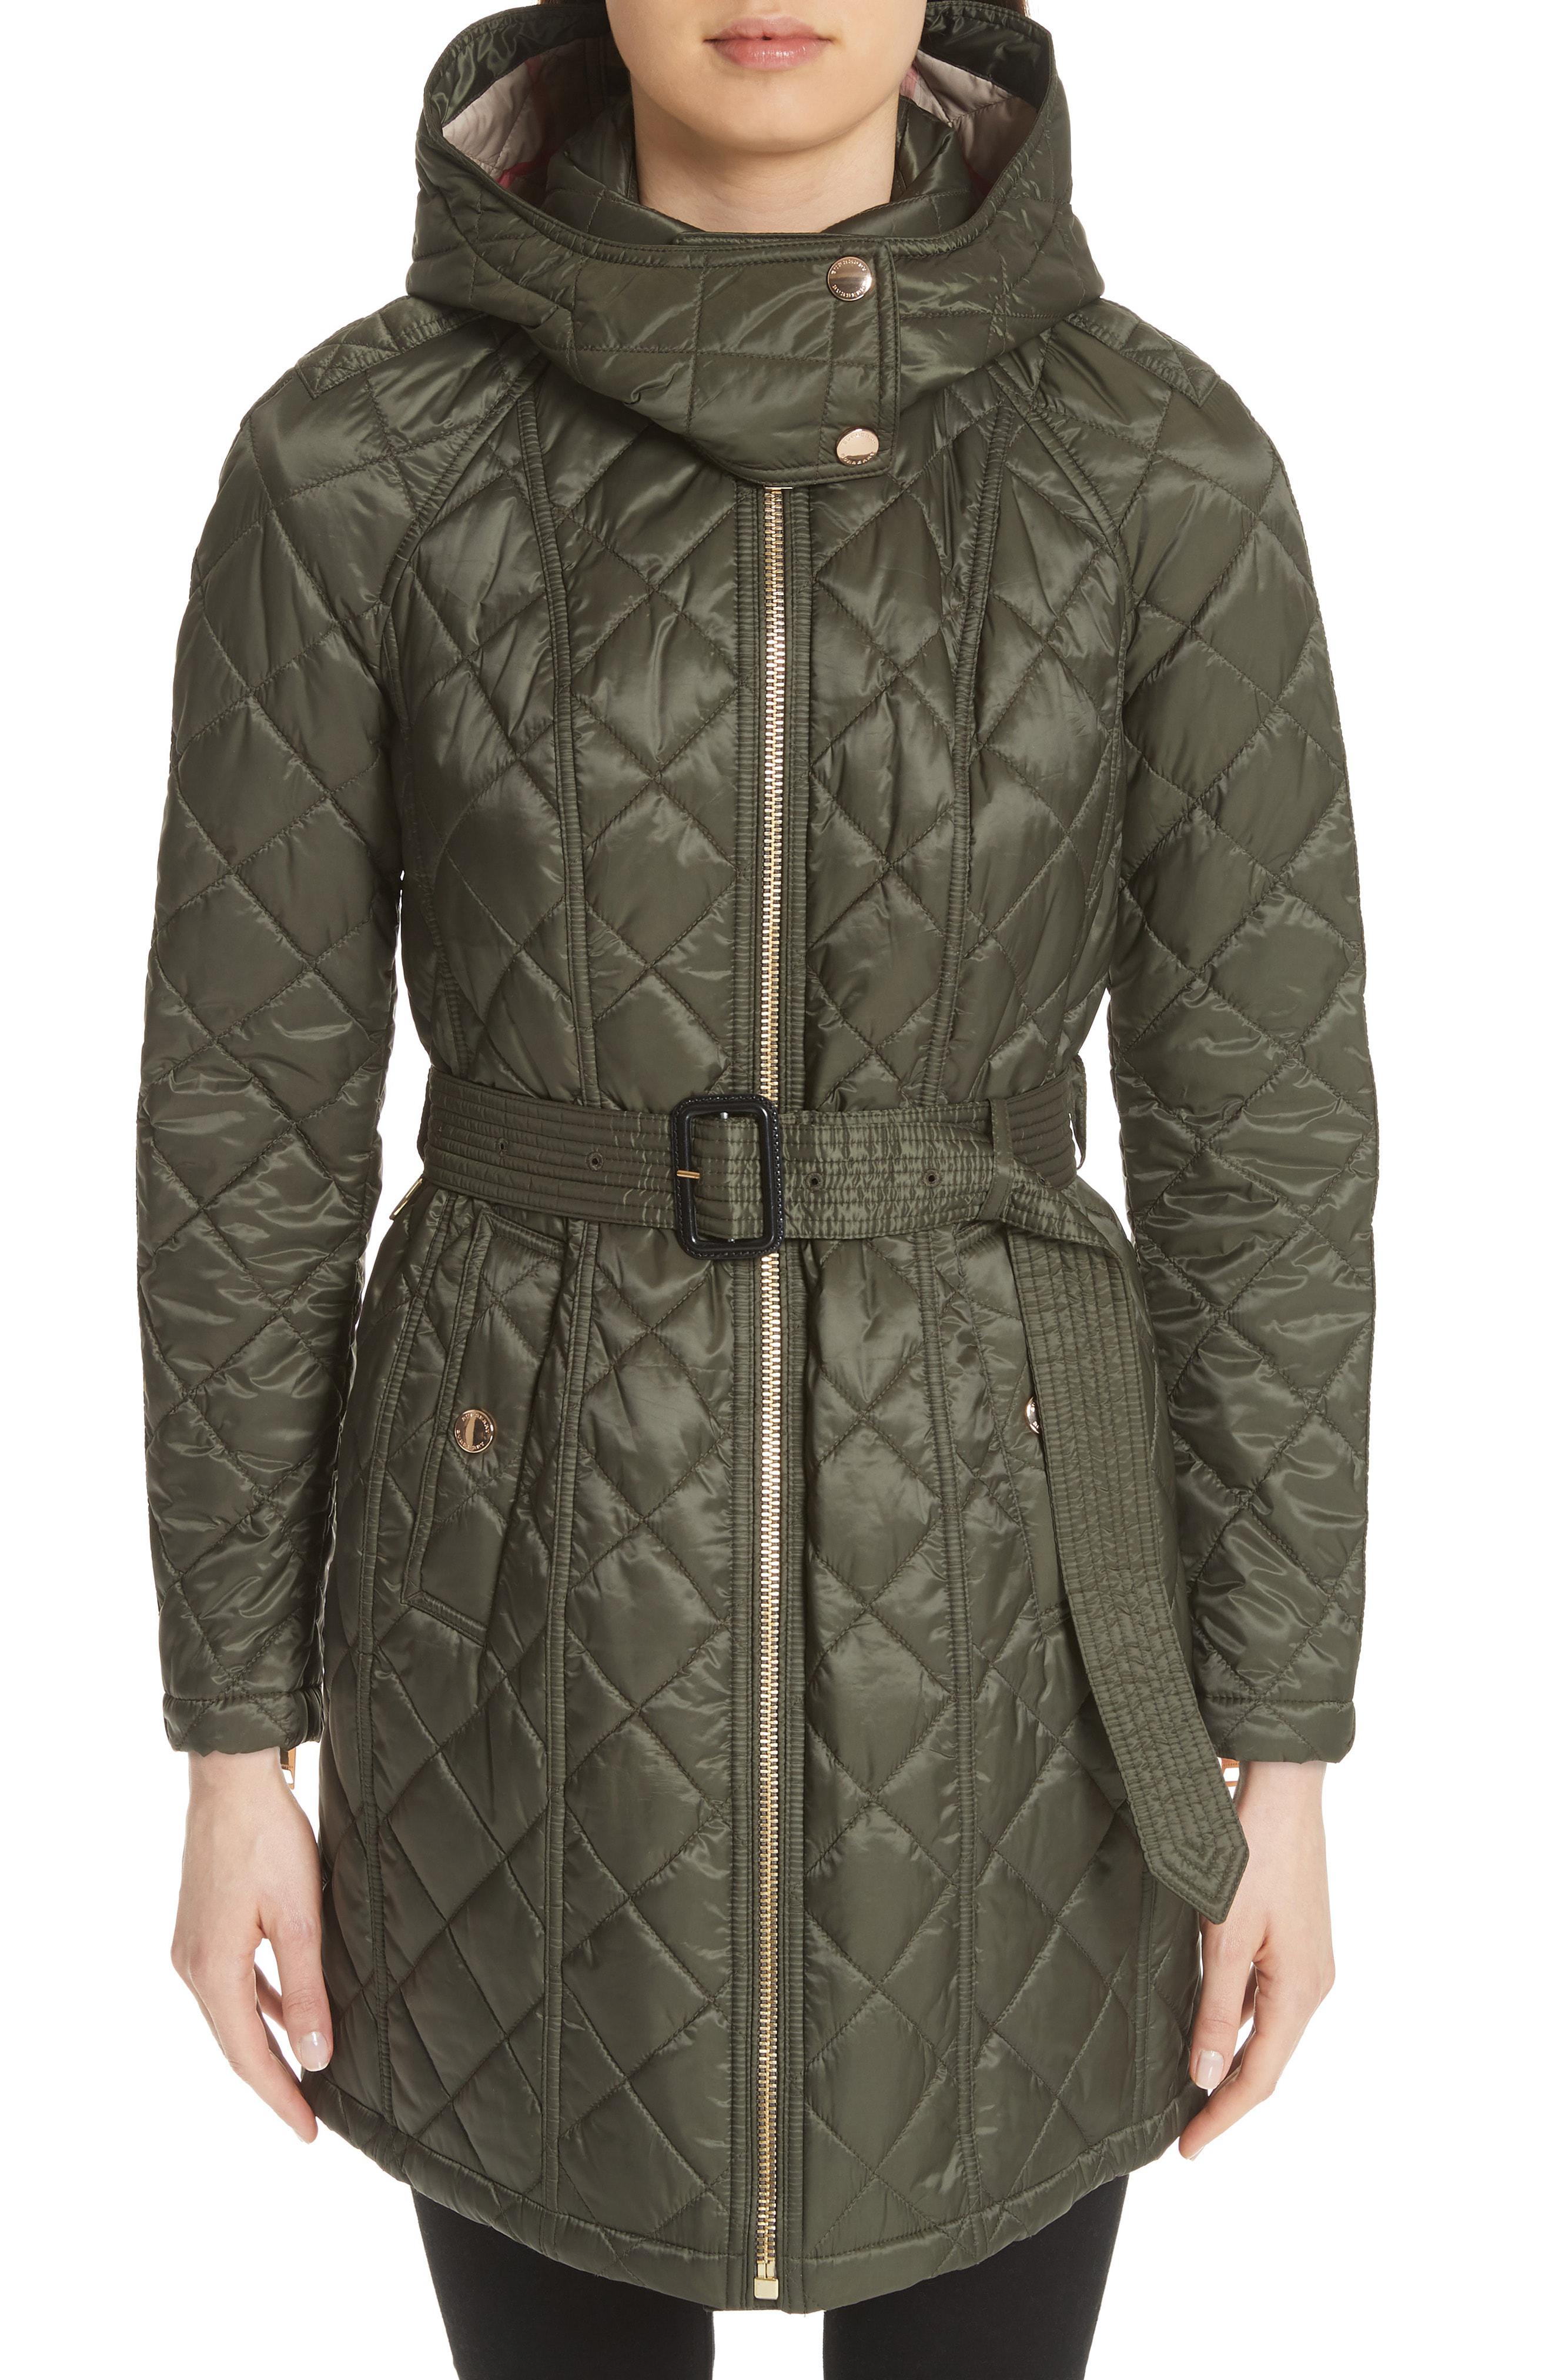 burberry baughton quilted jacket